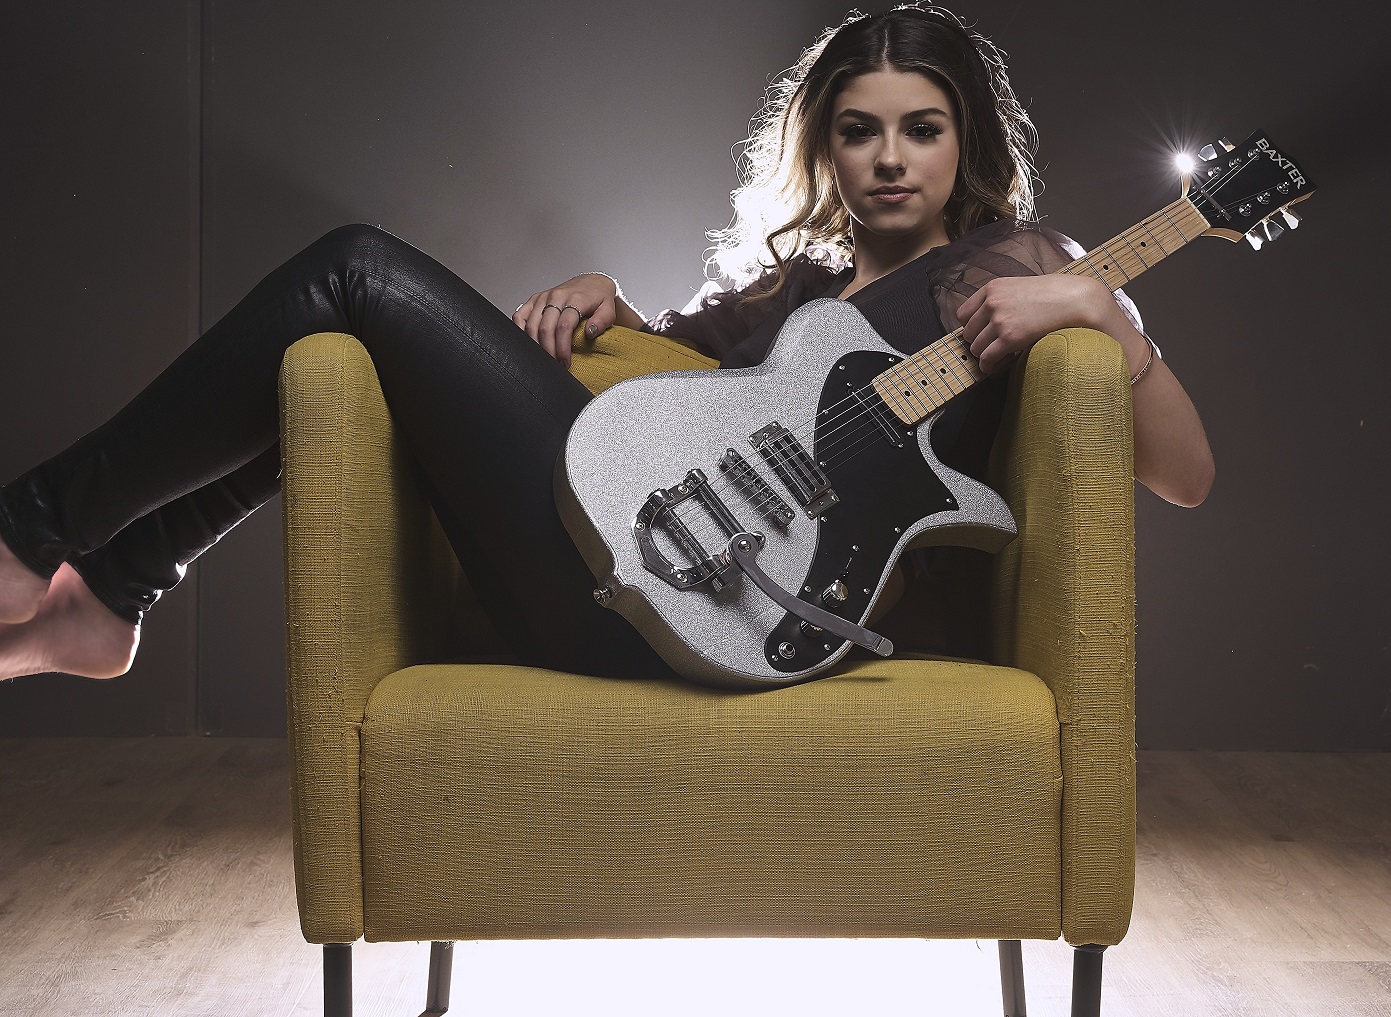 A woman lays across a chair holding a guitar